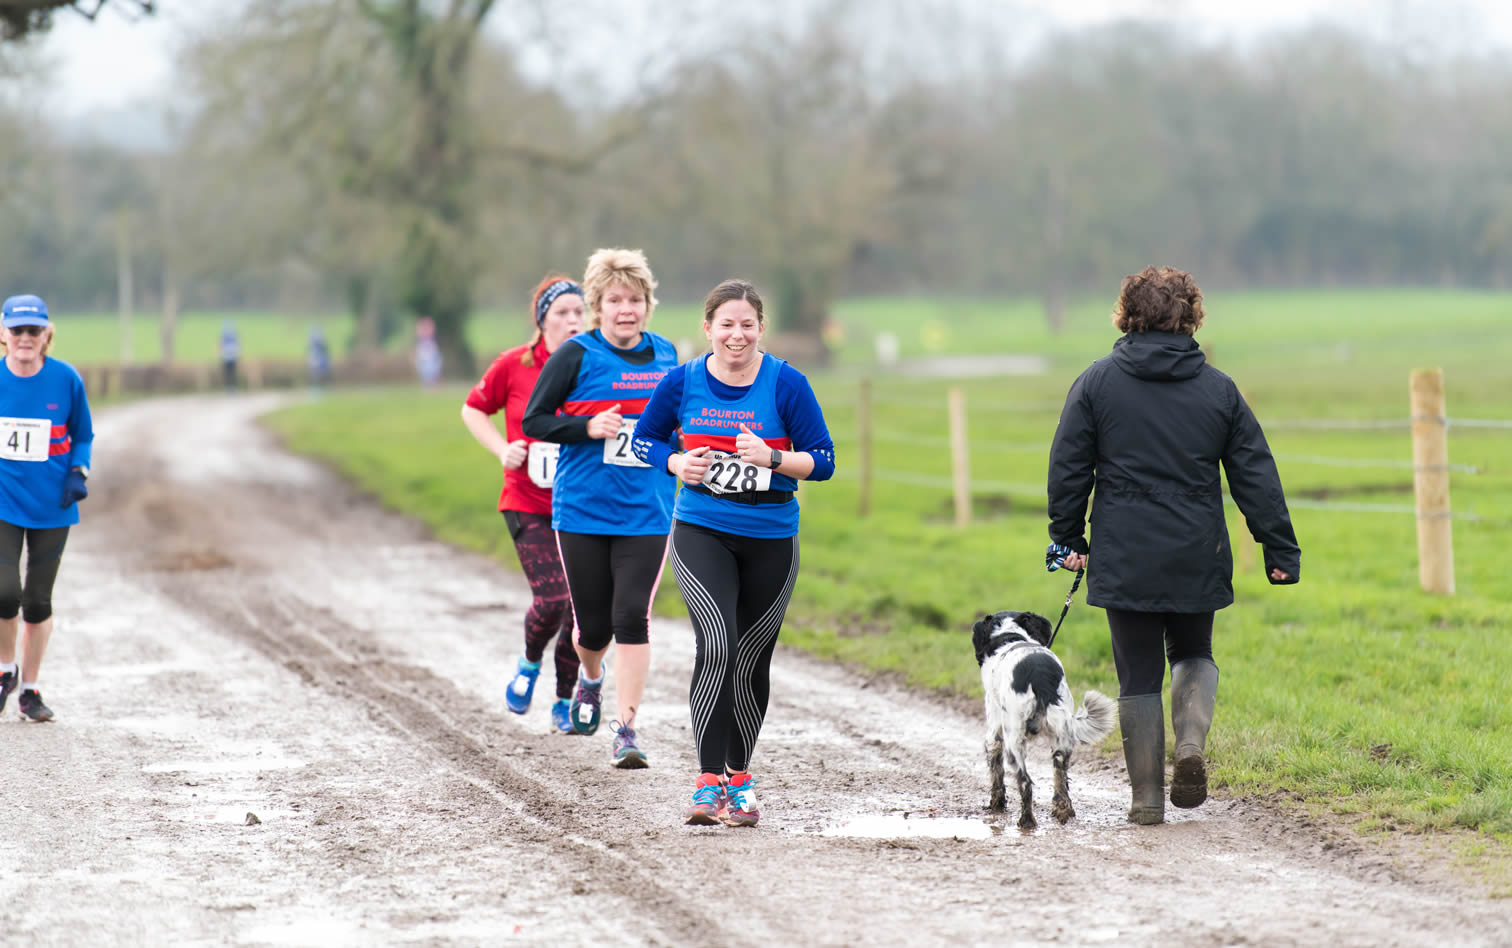 Bourton Roadrunners' Shirley Creed, Mary Worker and Janice Townsend at Staverton 10m - 26-01-2020